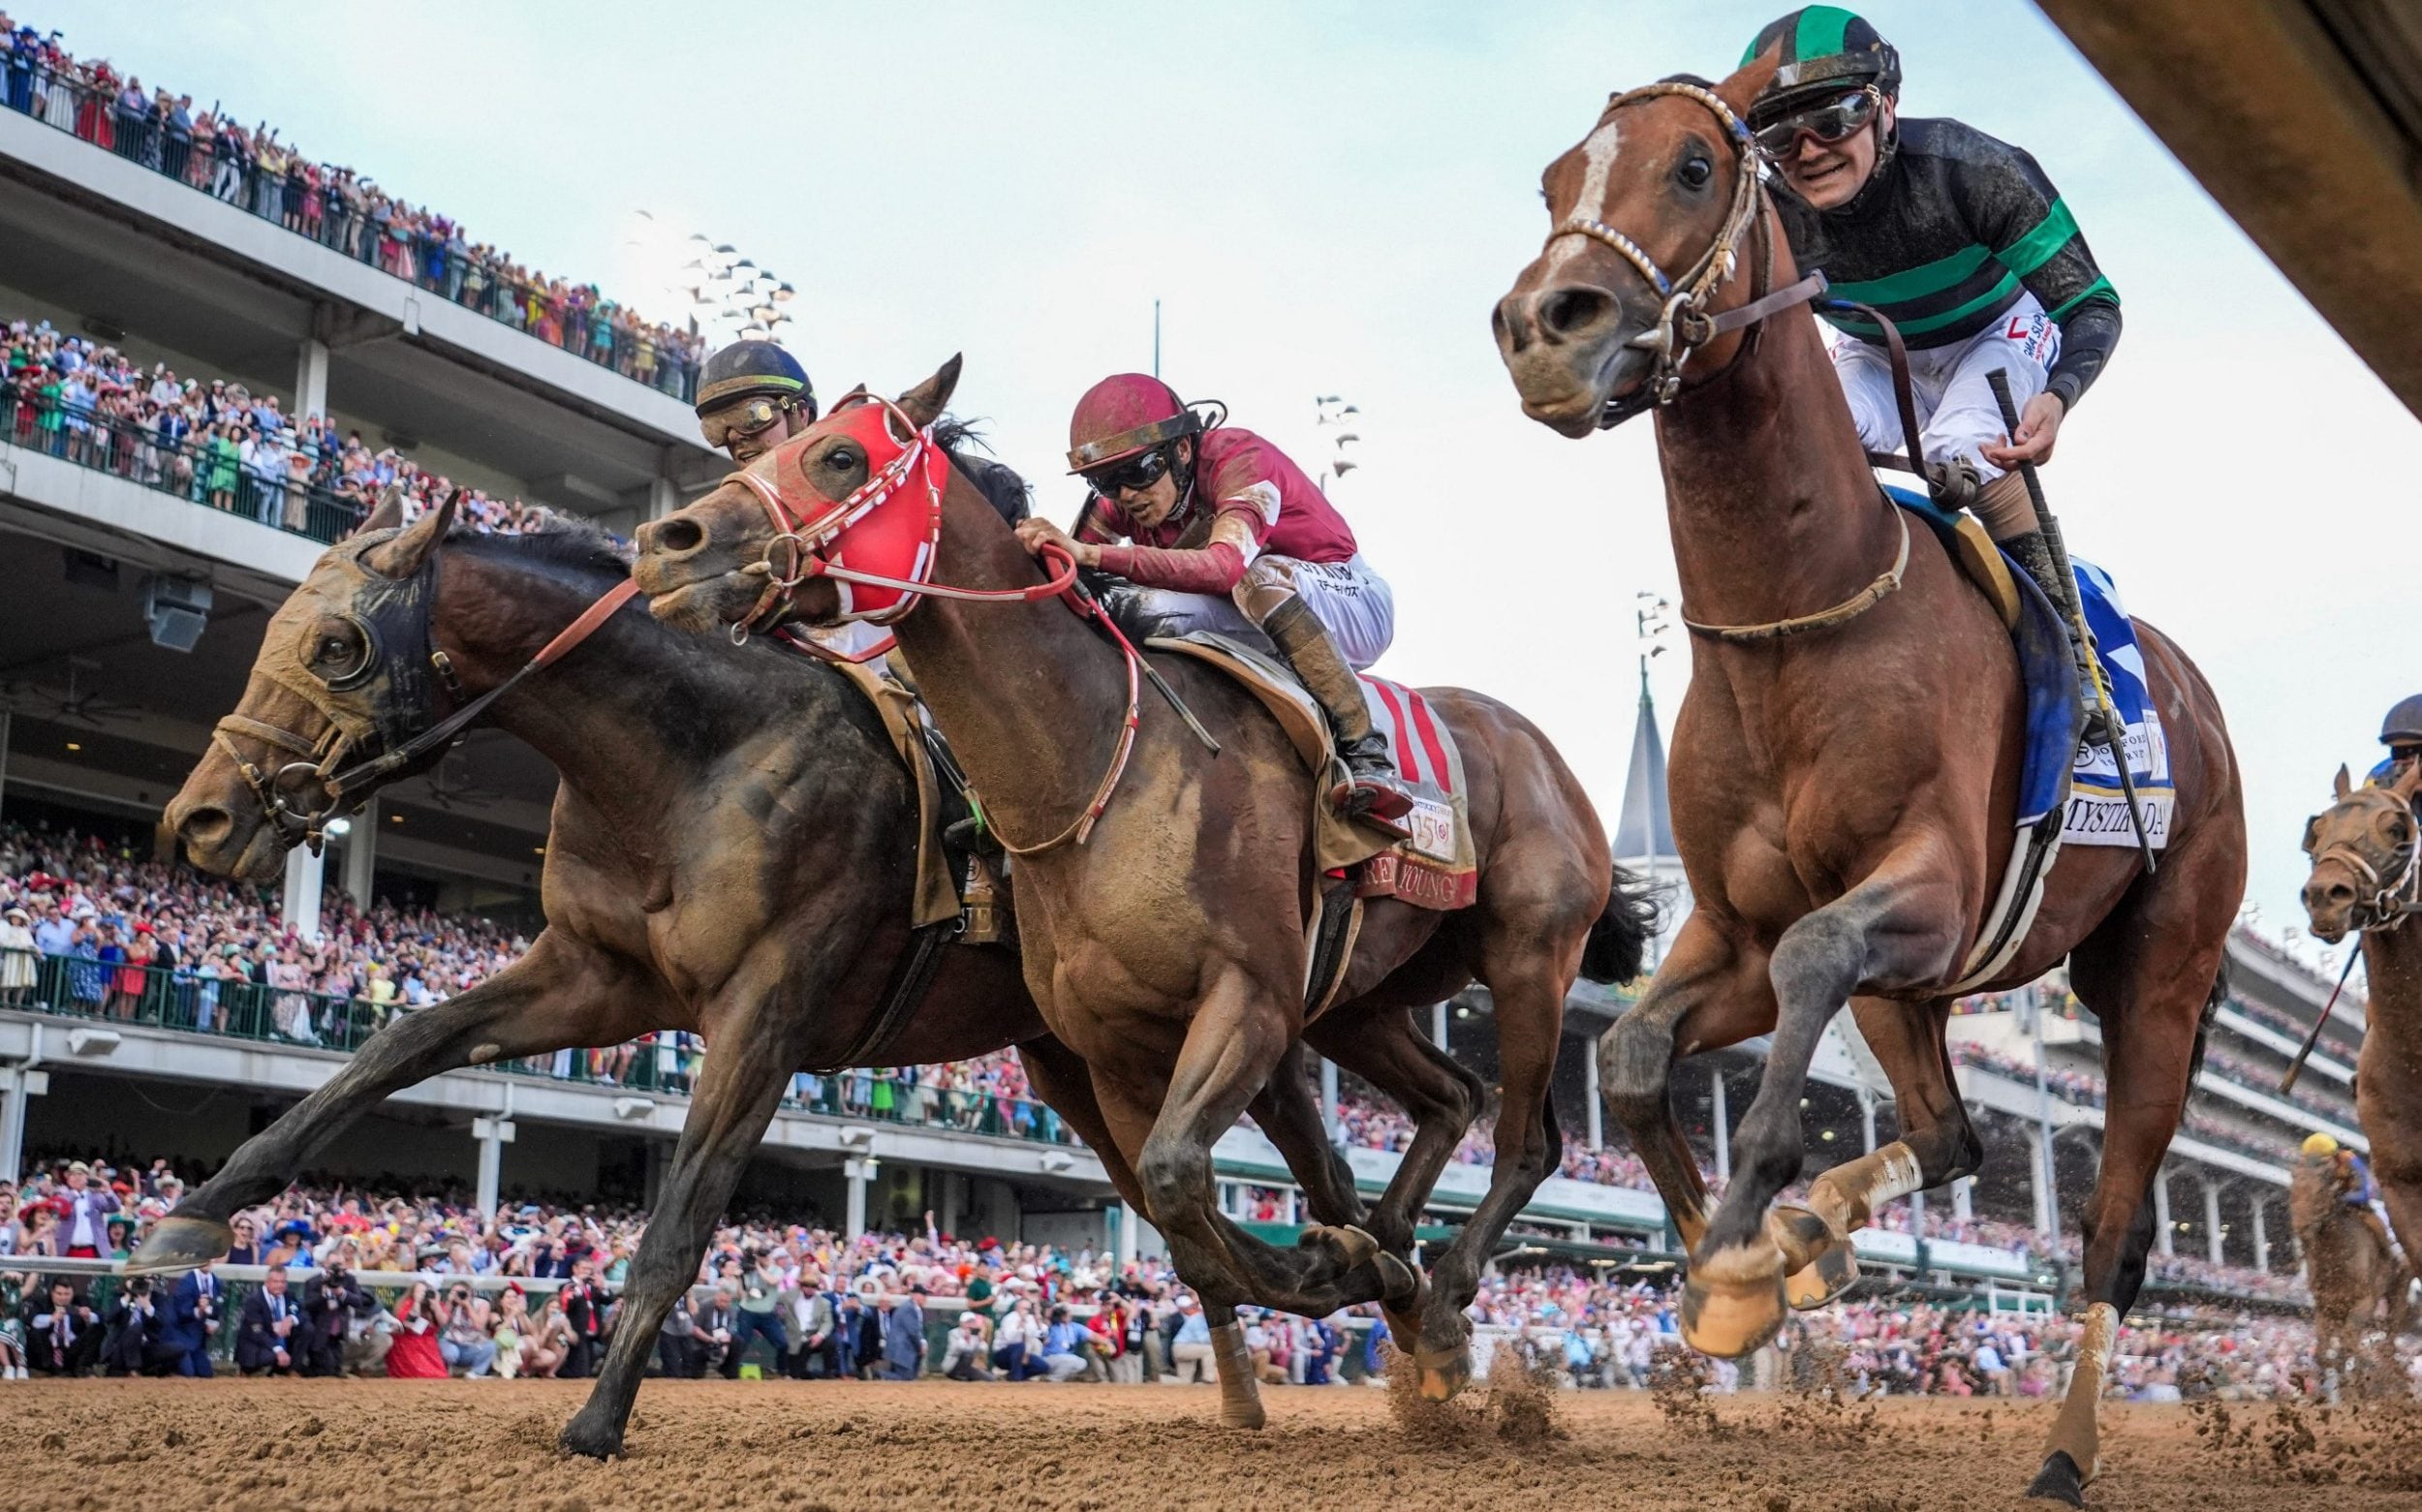 mystik dan, at 18-1, just edges out two rivals to win the 150th kentucky derby